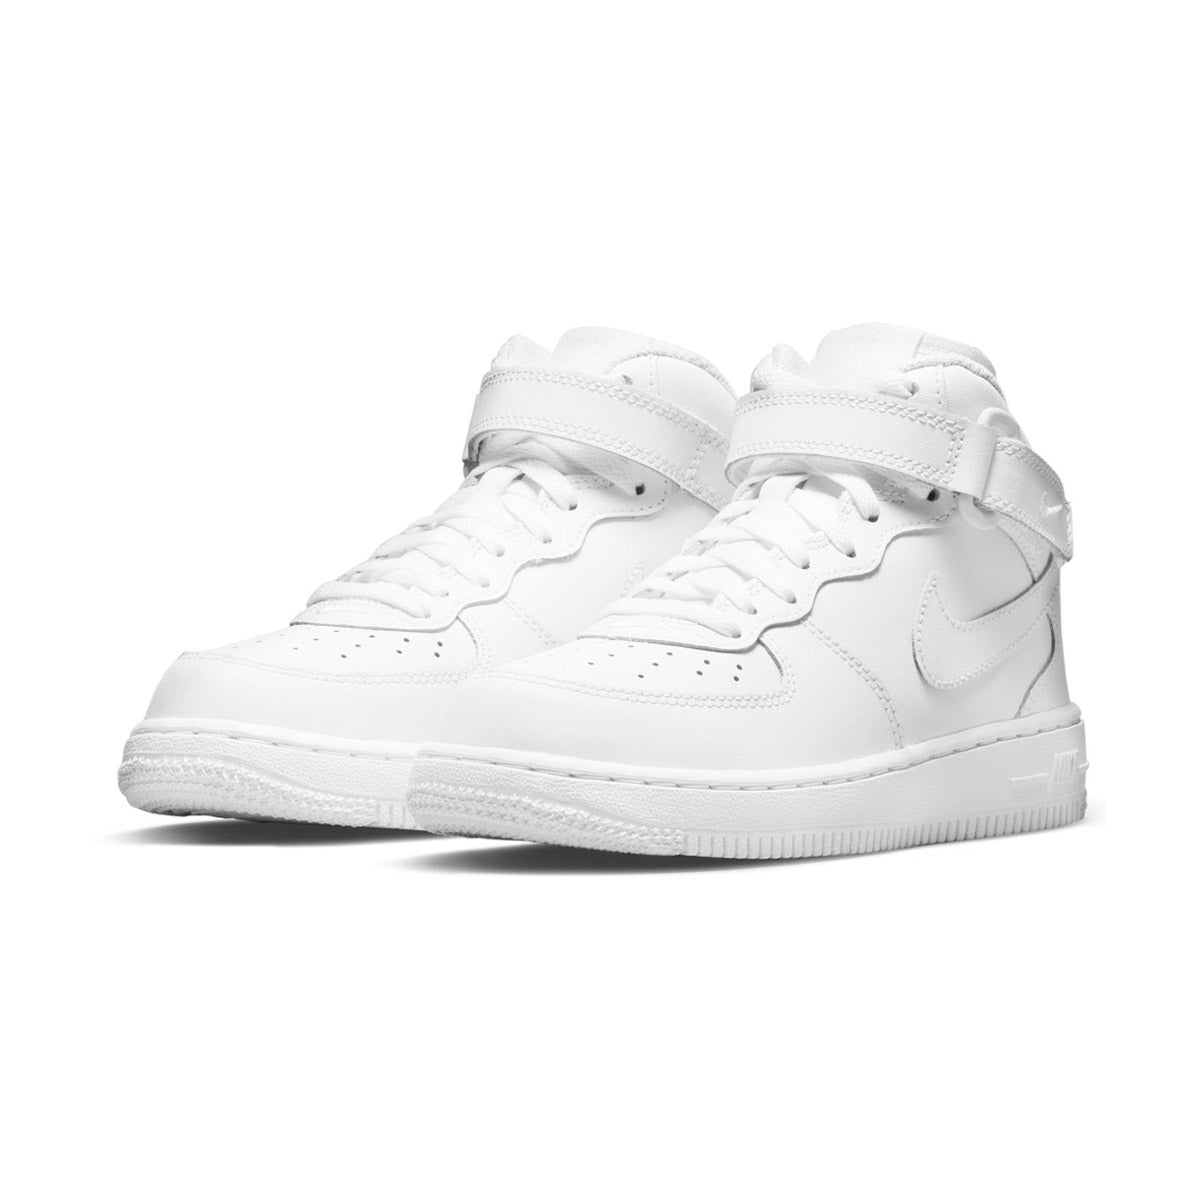 Nike Air Force 1 Mid Little Kids' Basketball Shoes